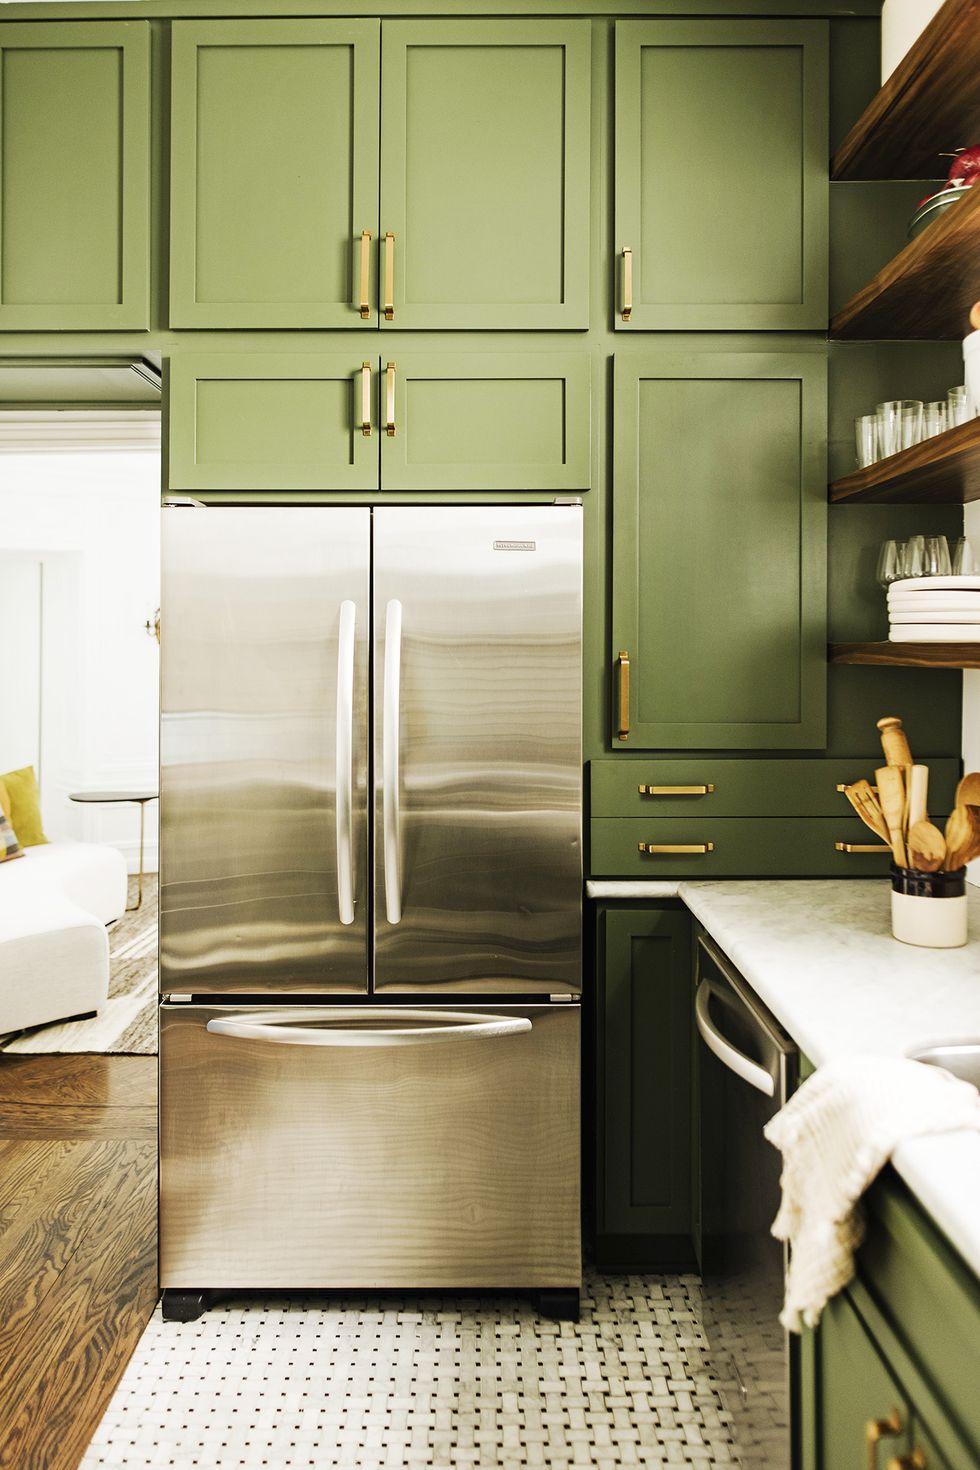 Achieve a Green Kitchen With These 20 Gorgeous Ideas